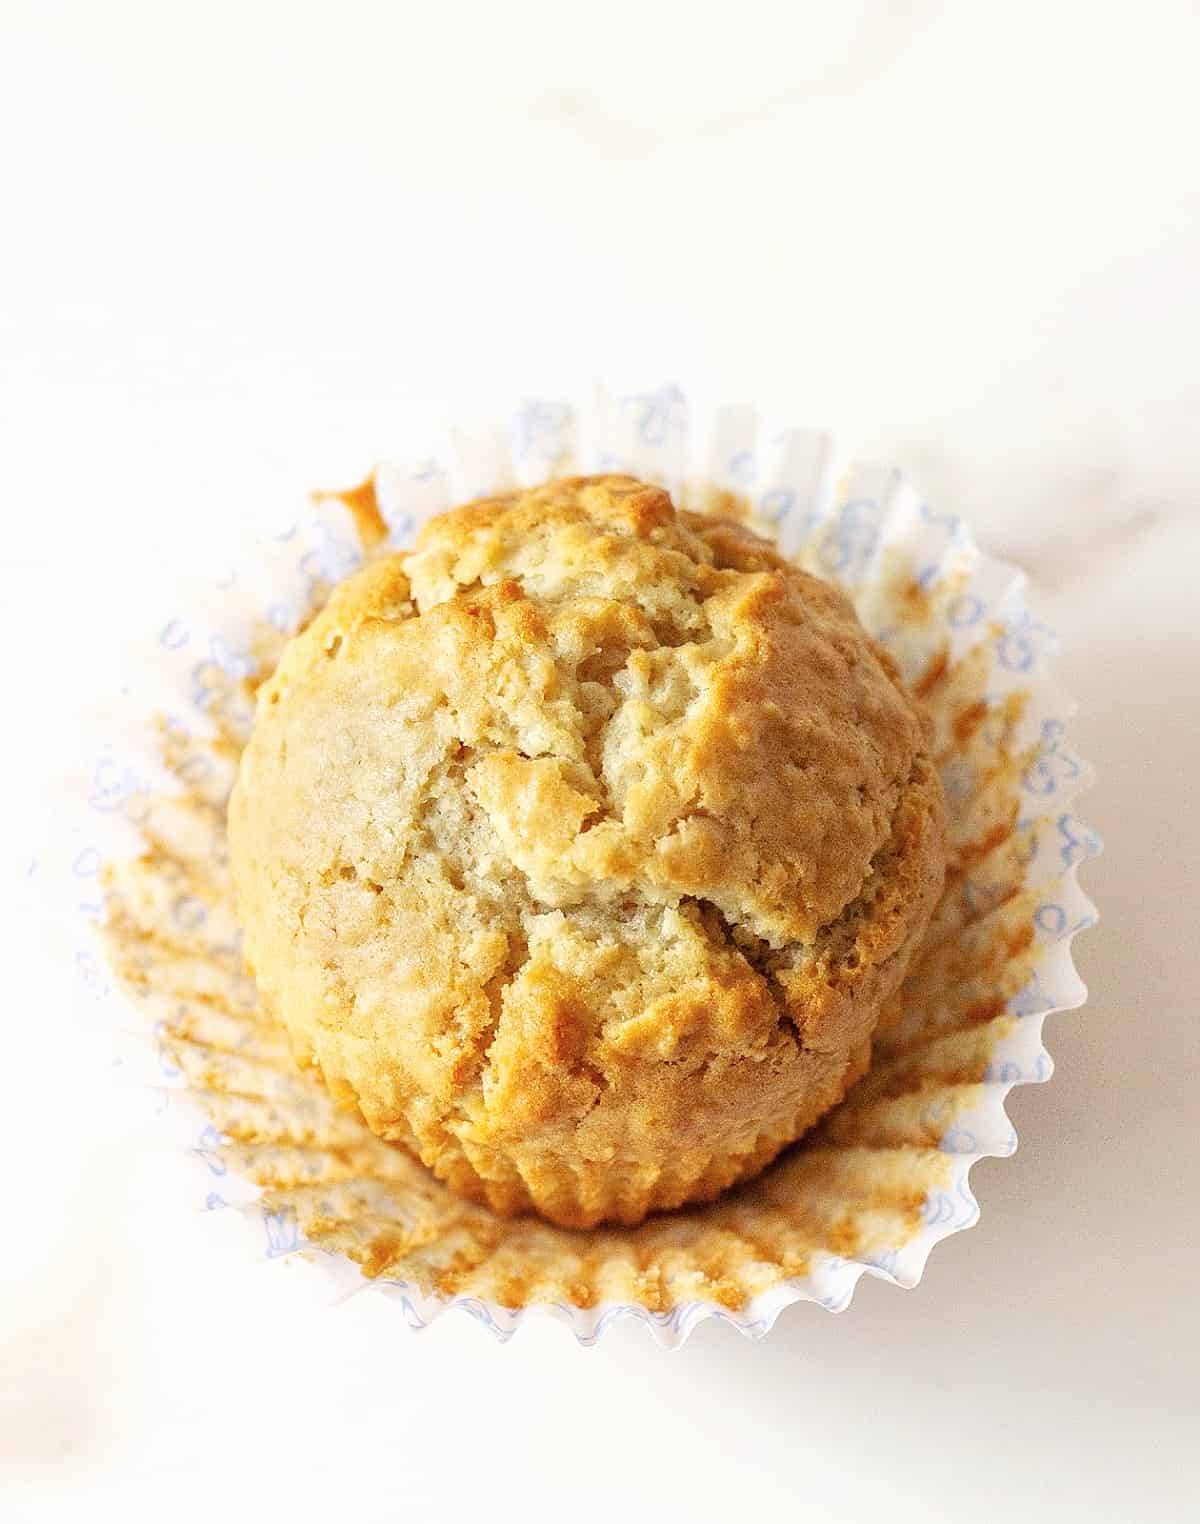 One golden colored muffin on an opened whitish paper cup, white surface